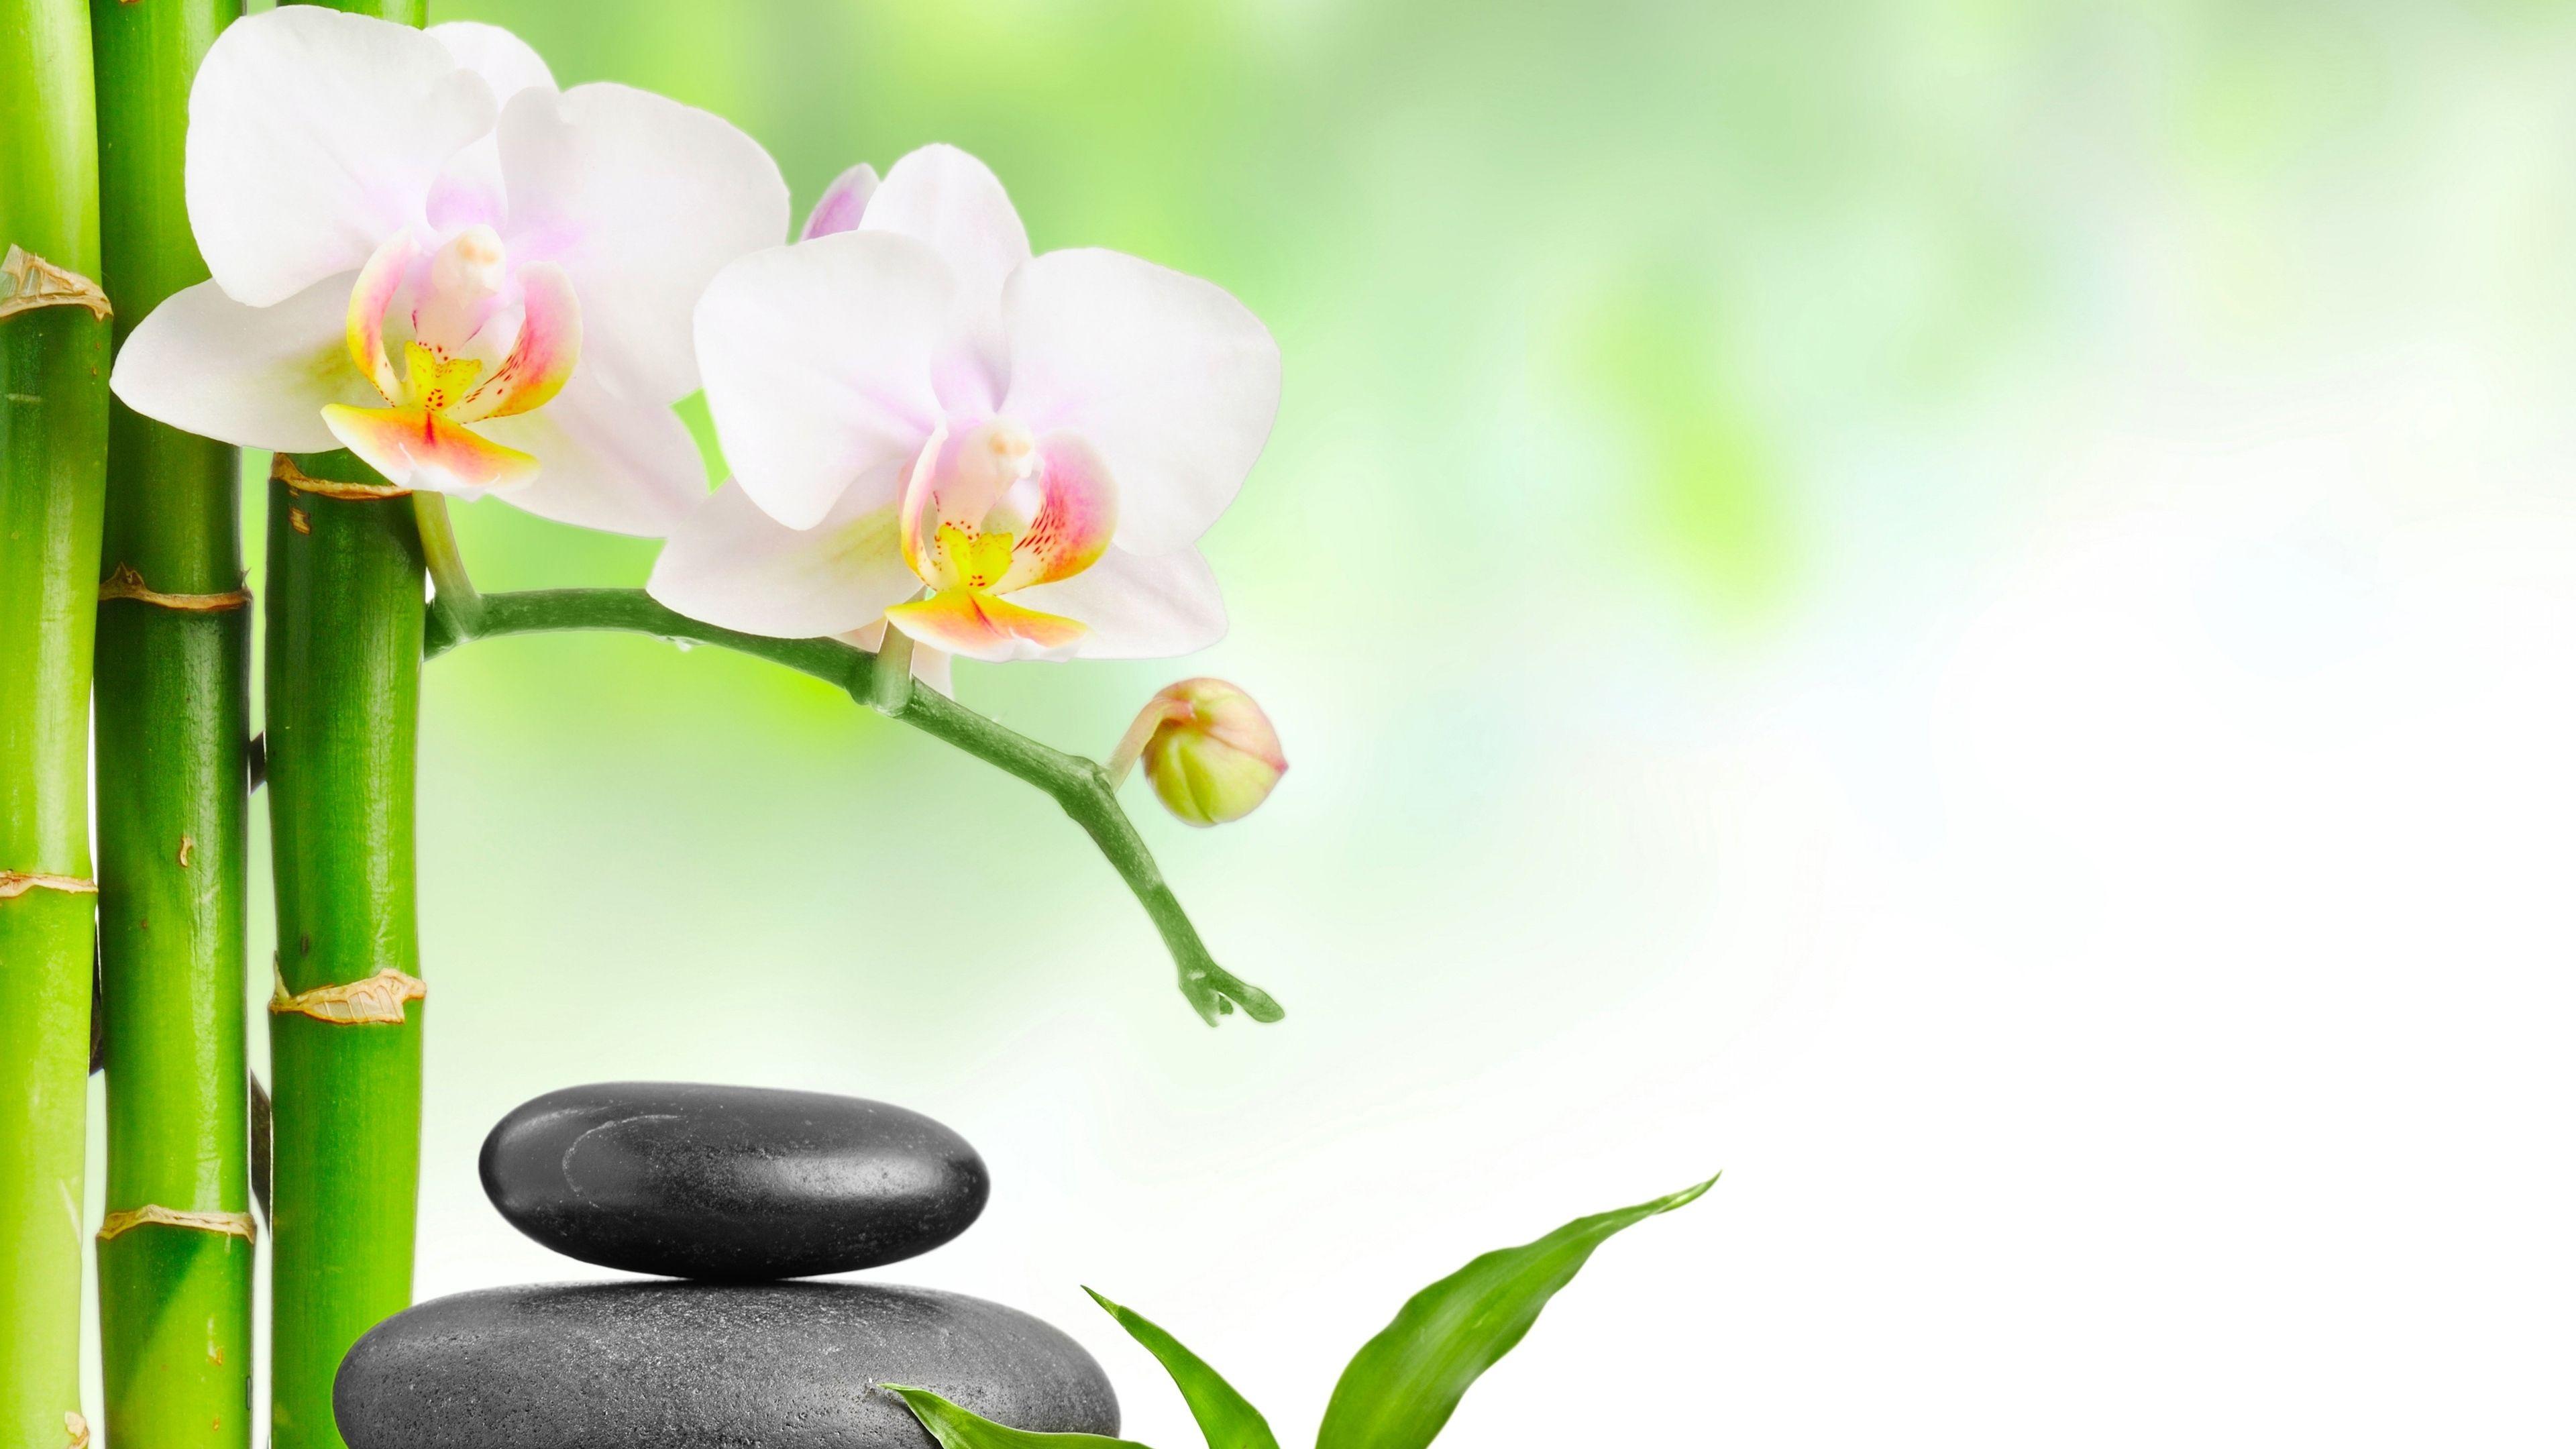 Spa Stones With Orchid Ultra HD Wallpaper. UHD Wallpaper.Net